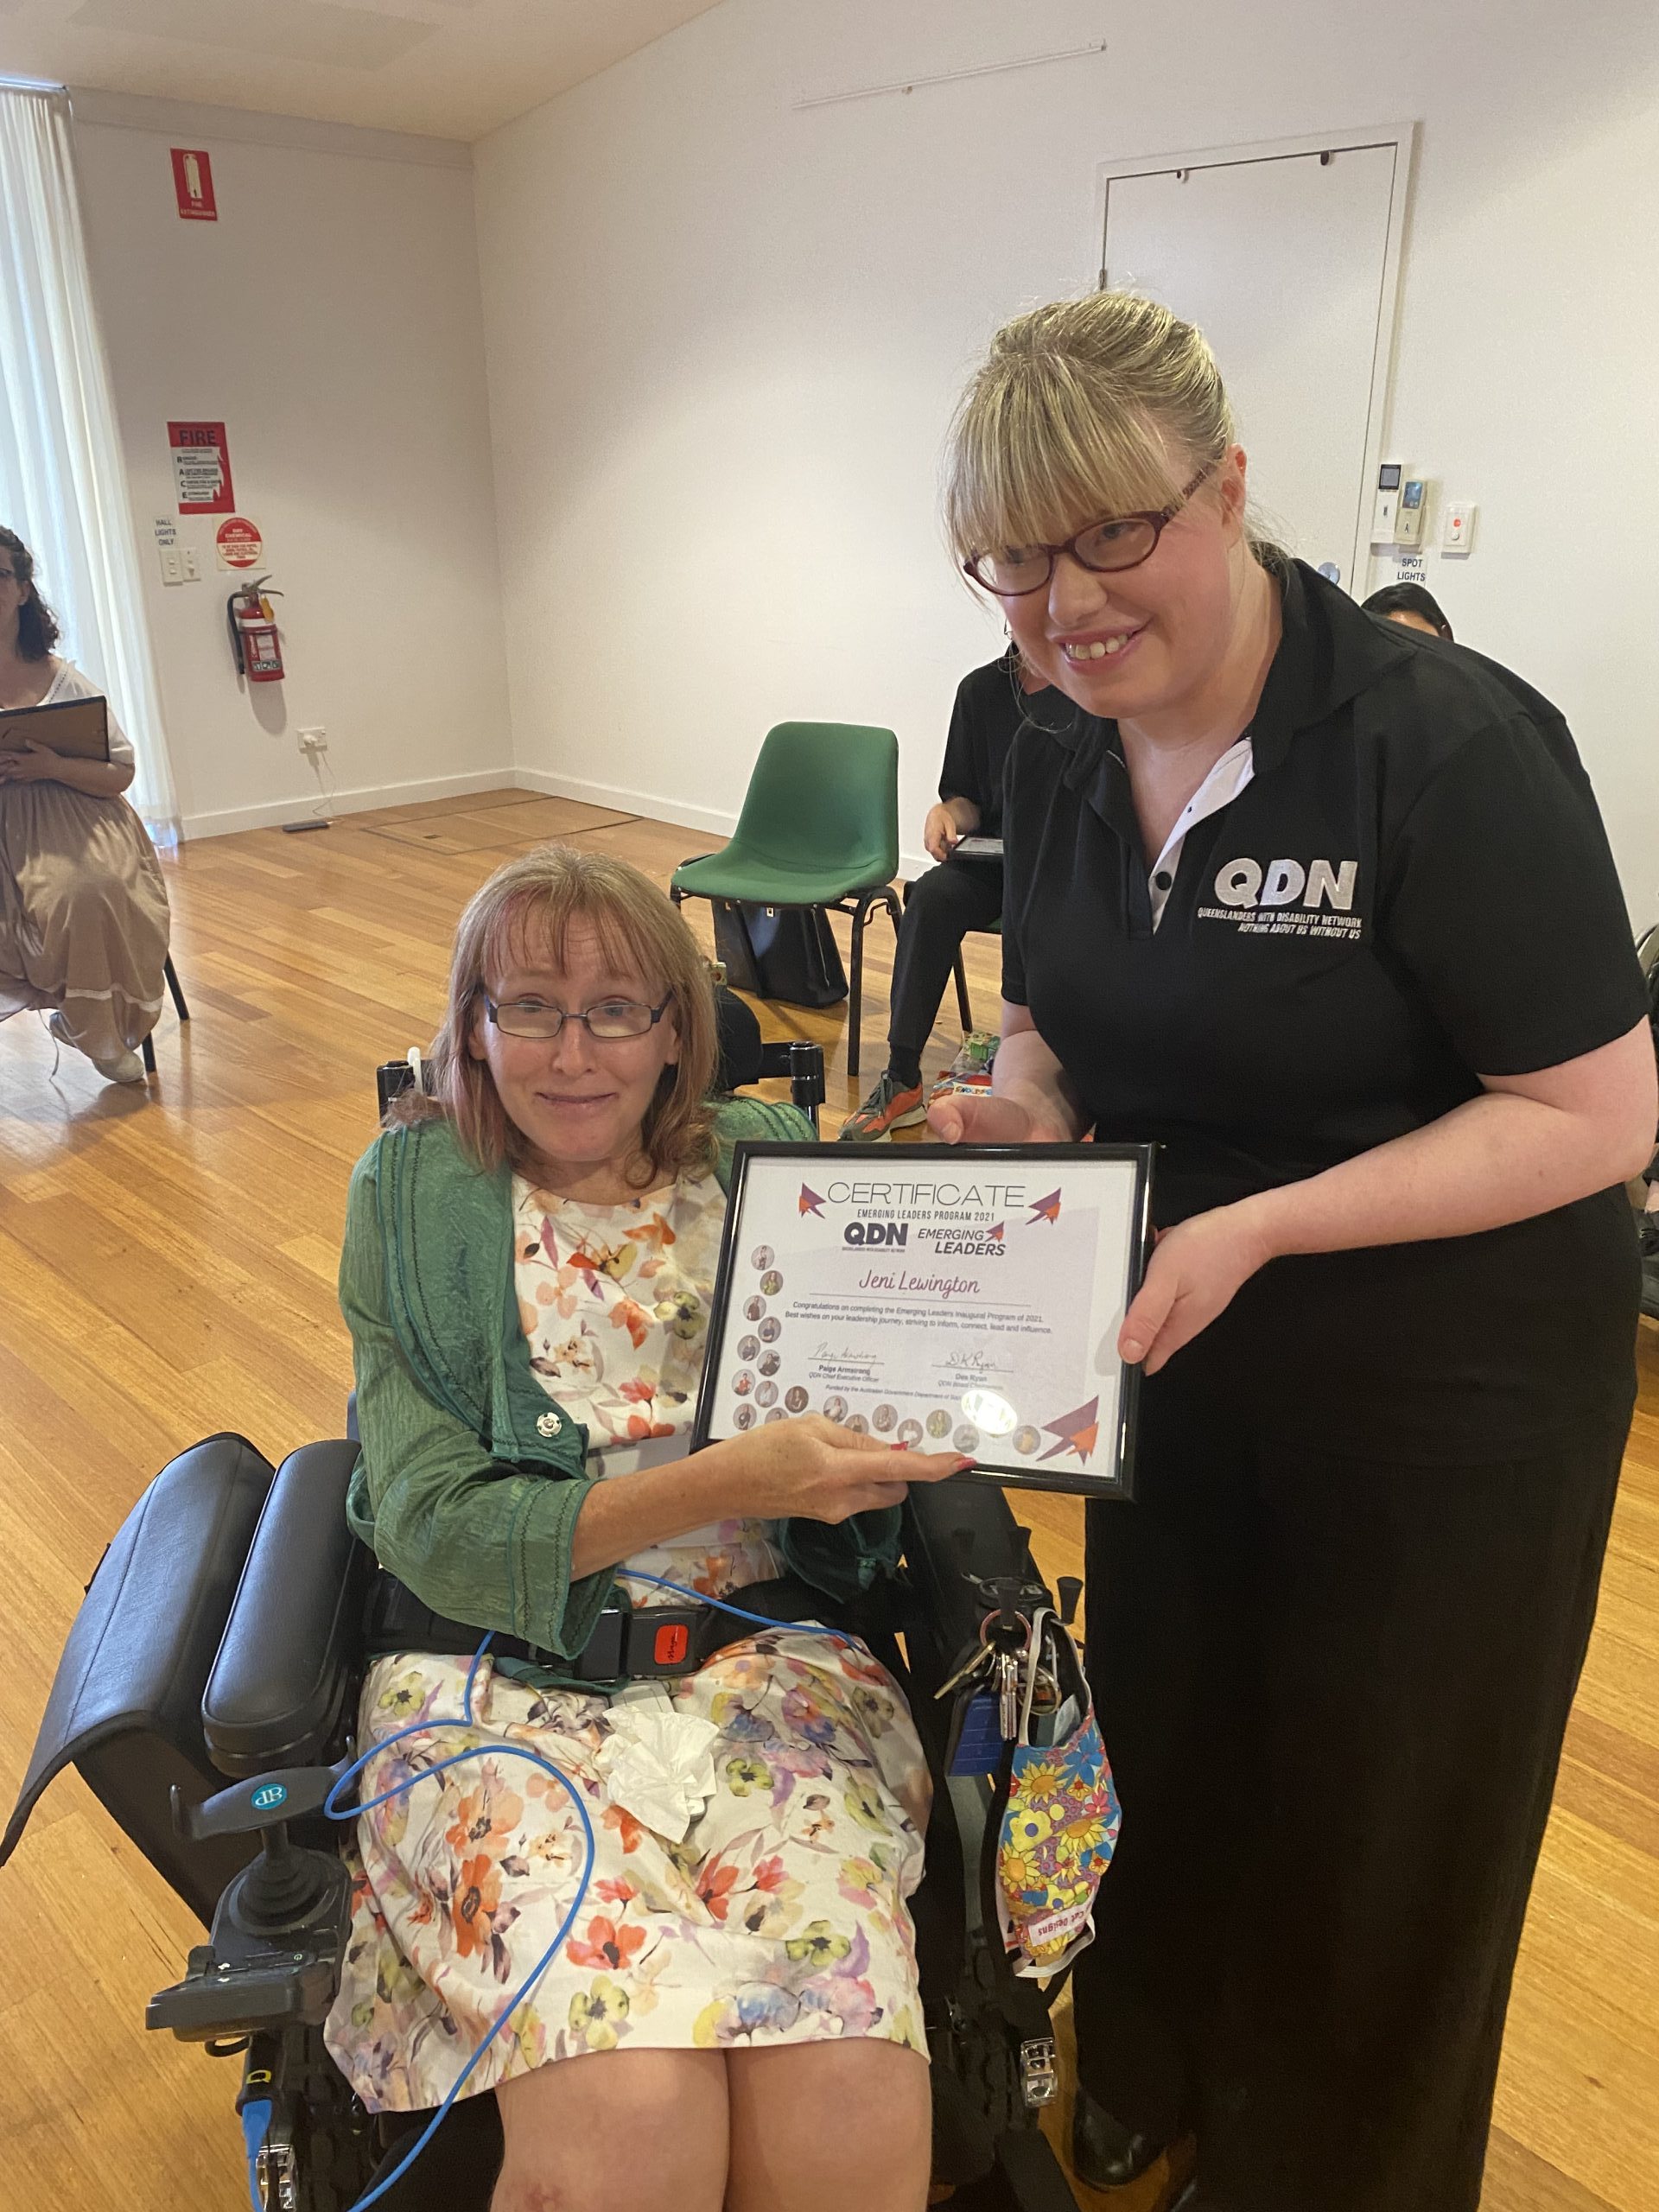 A lady in a wheel chair and another lady standing next to her wearing a QDN shirt. They are holding a framed certificate together and looking at the camera smiling.